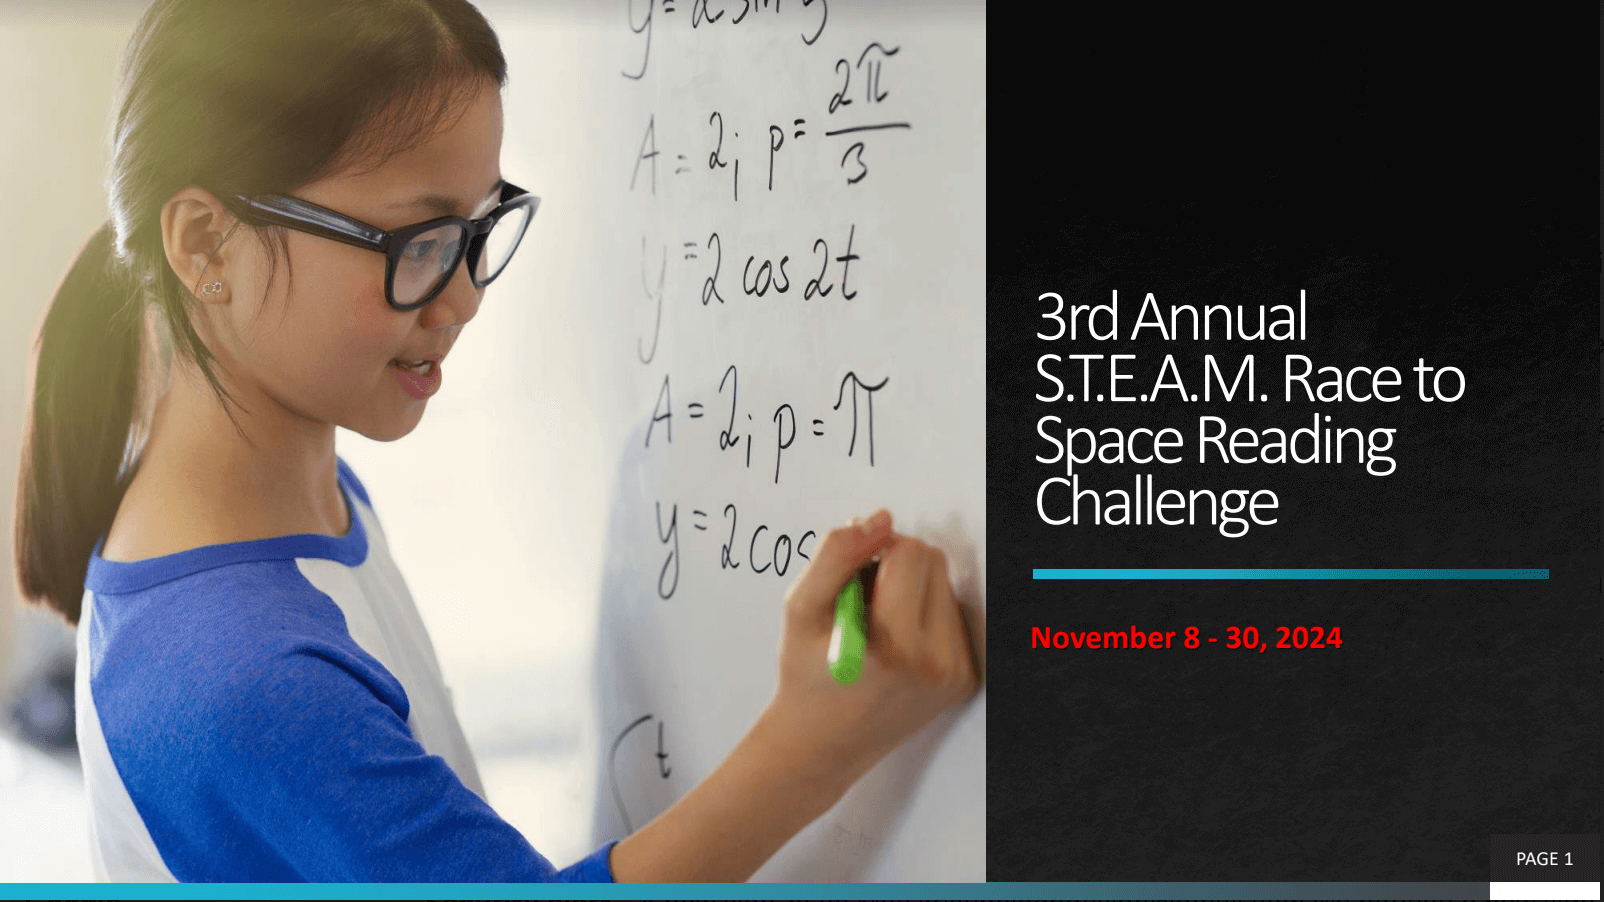 Girl solving a long math equation on a whiteboard. Text: 3rd Annual S.T.E.A.M. Race to Space Reading Challenge. November 8–30, 2024.